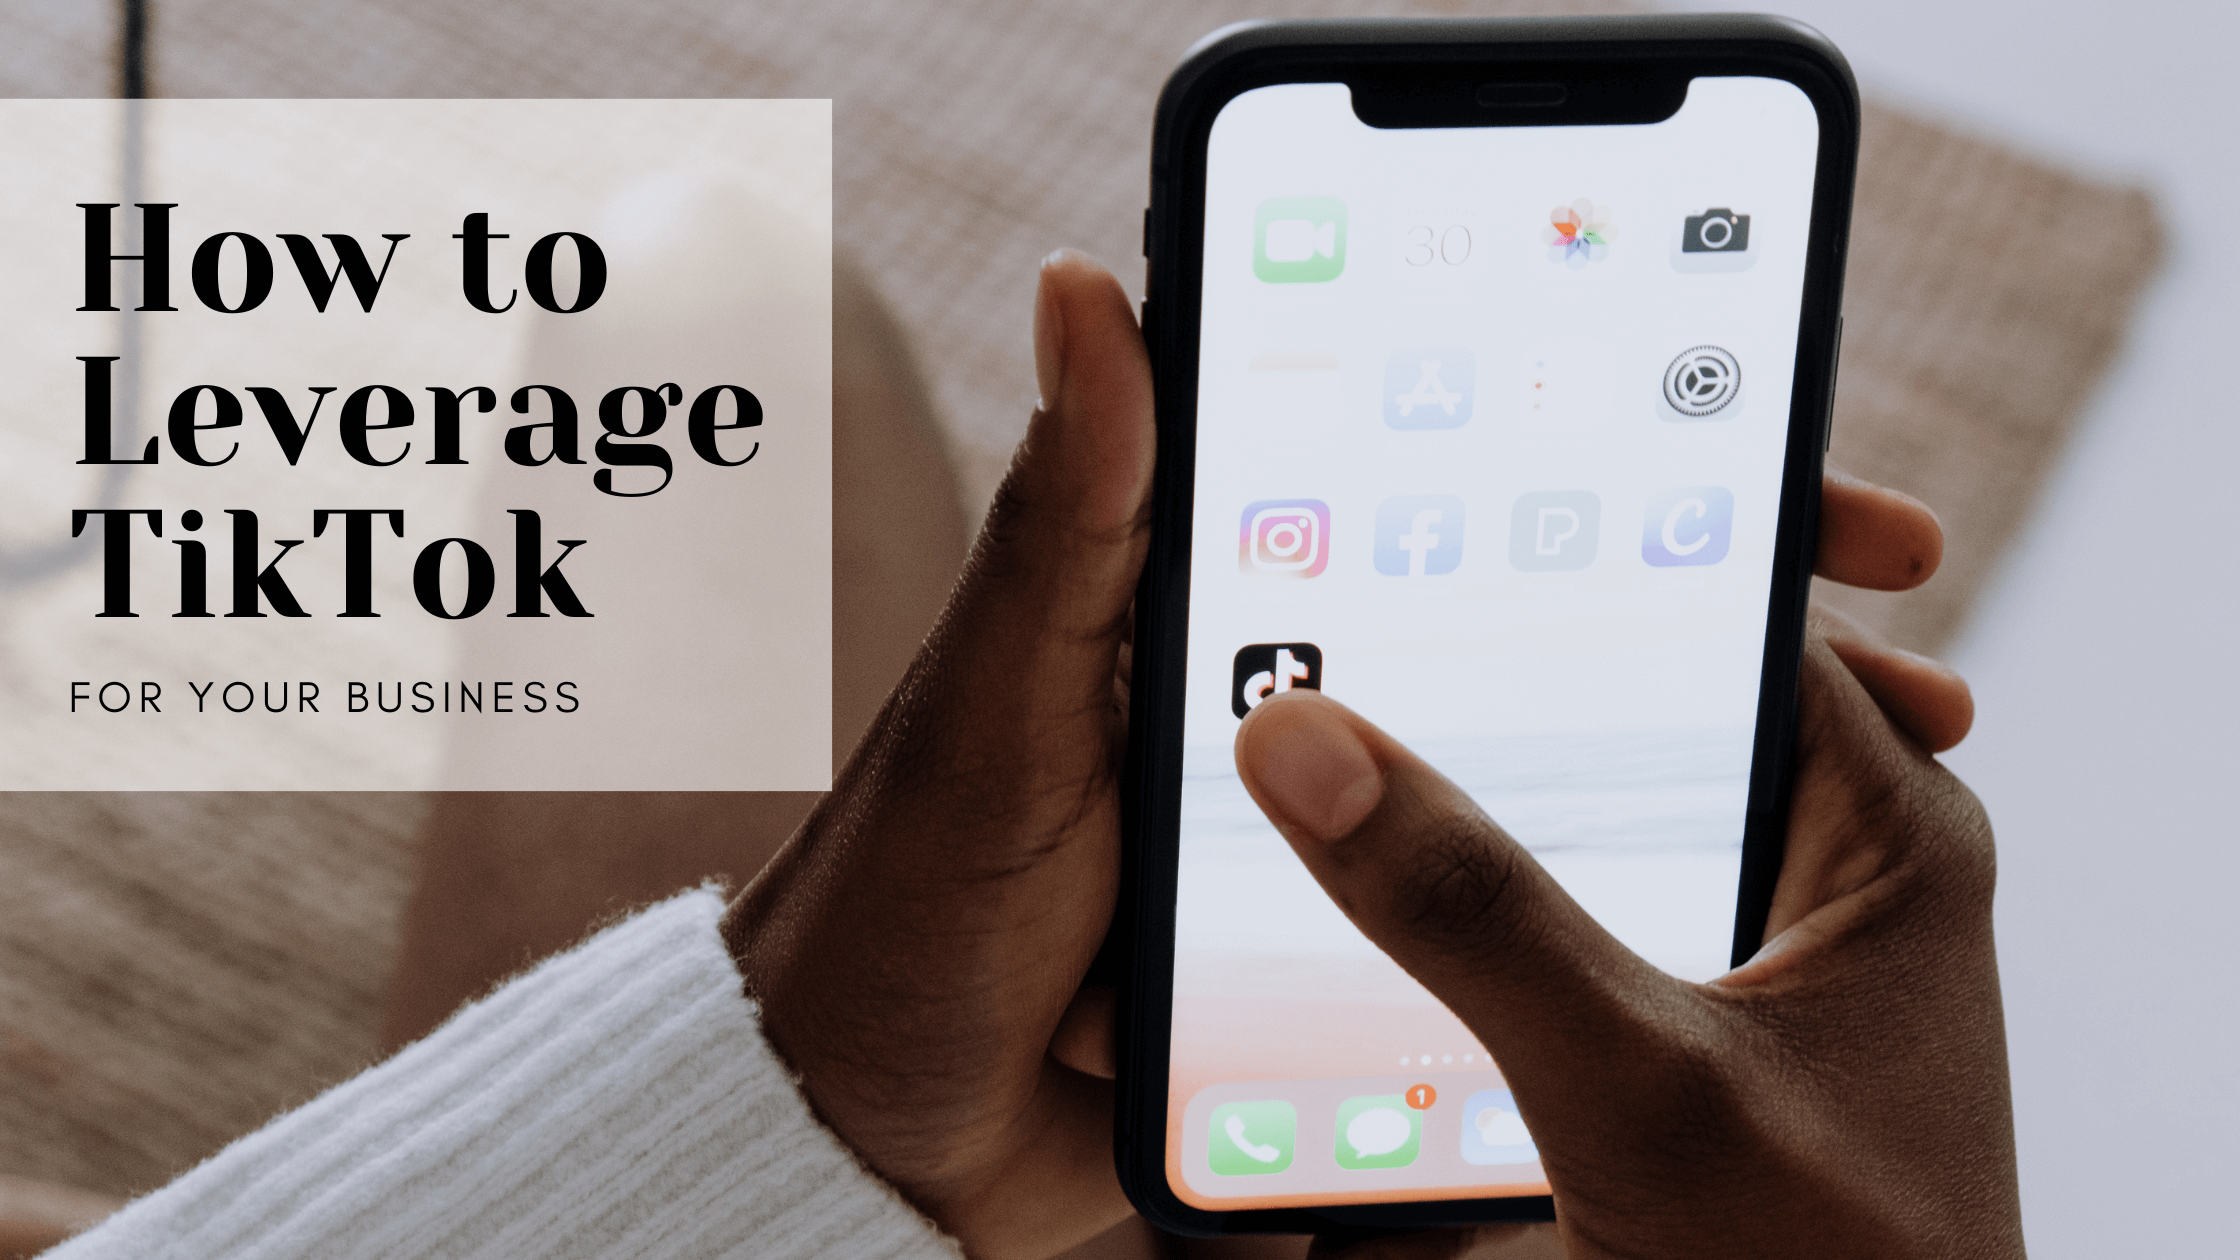 How To Leverage TikTok For Business